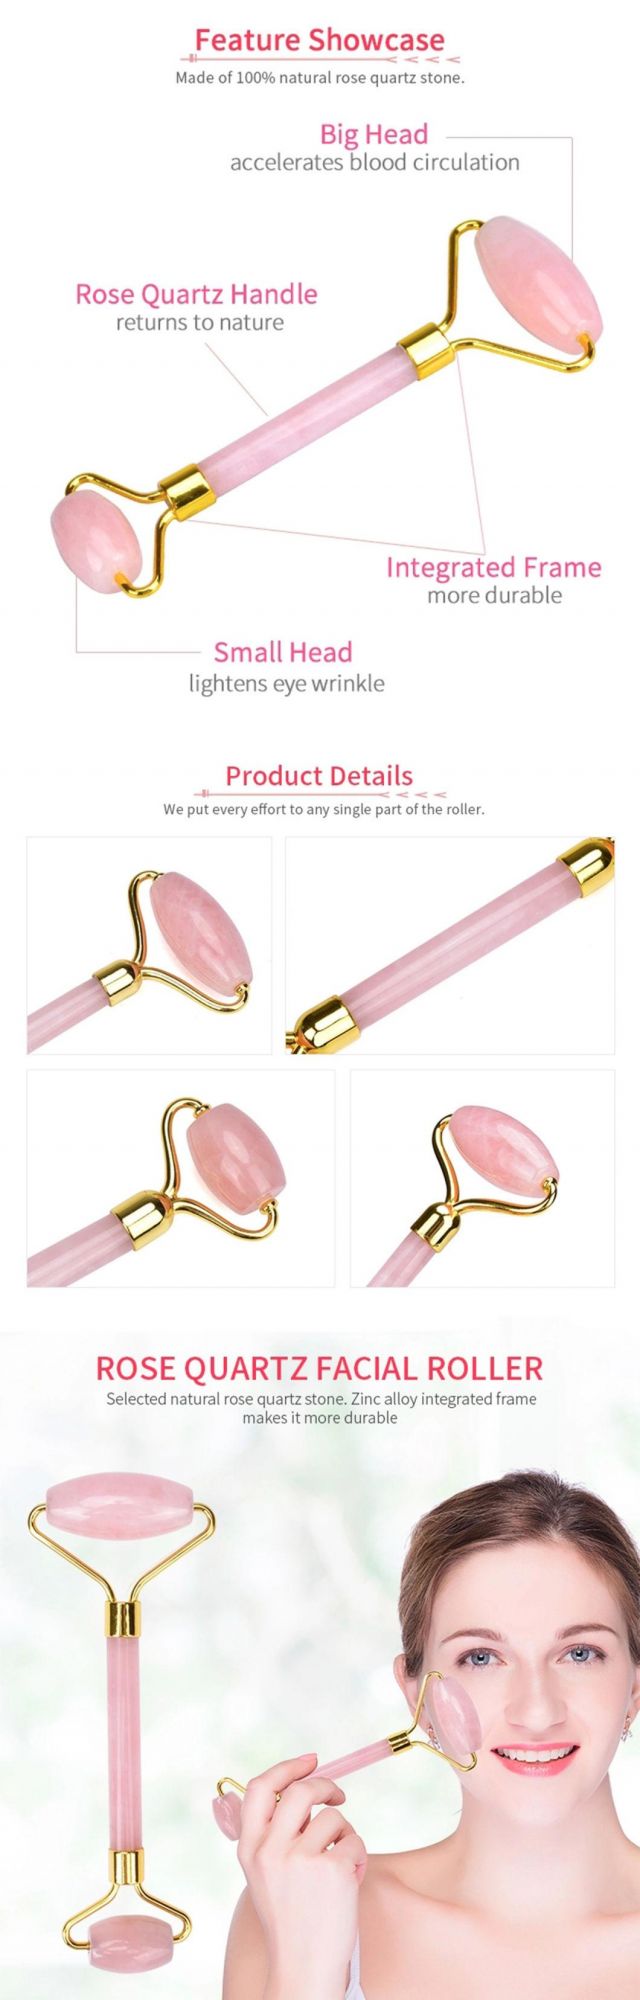 China Products/Suppliers. 100% Real Natural Crystal Rose Quartz Jade Roller Set for Facial Massager